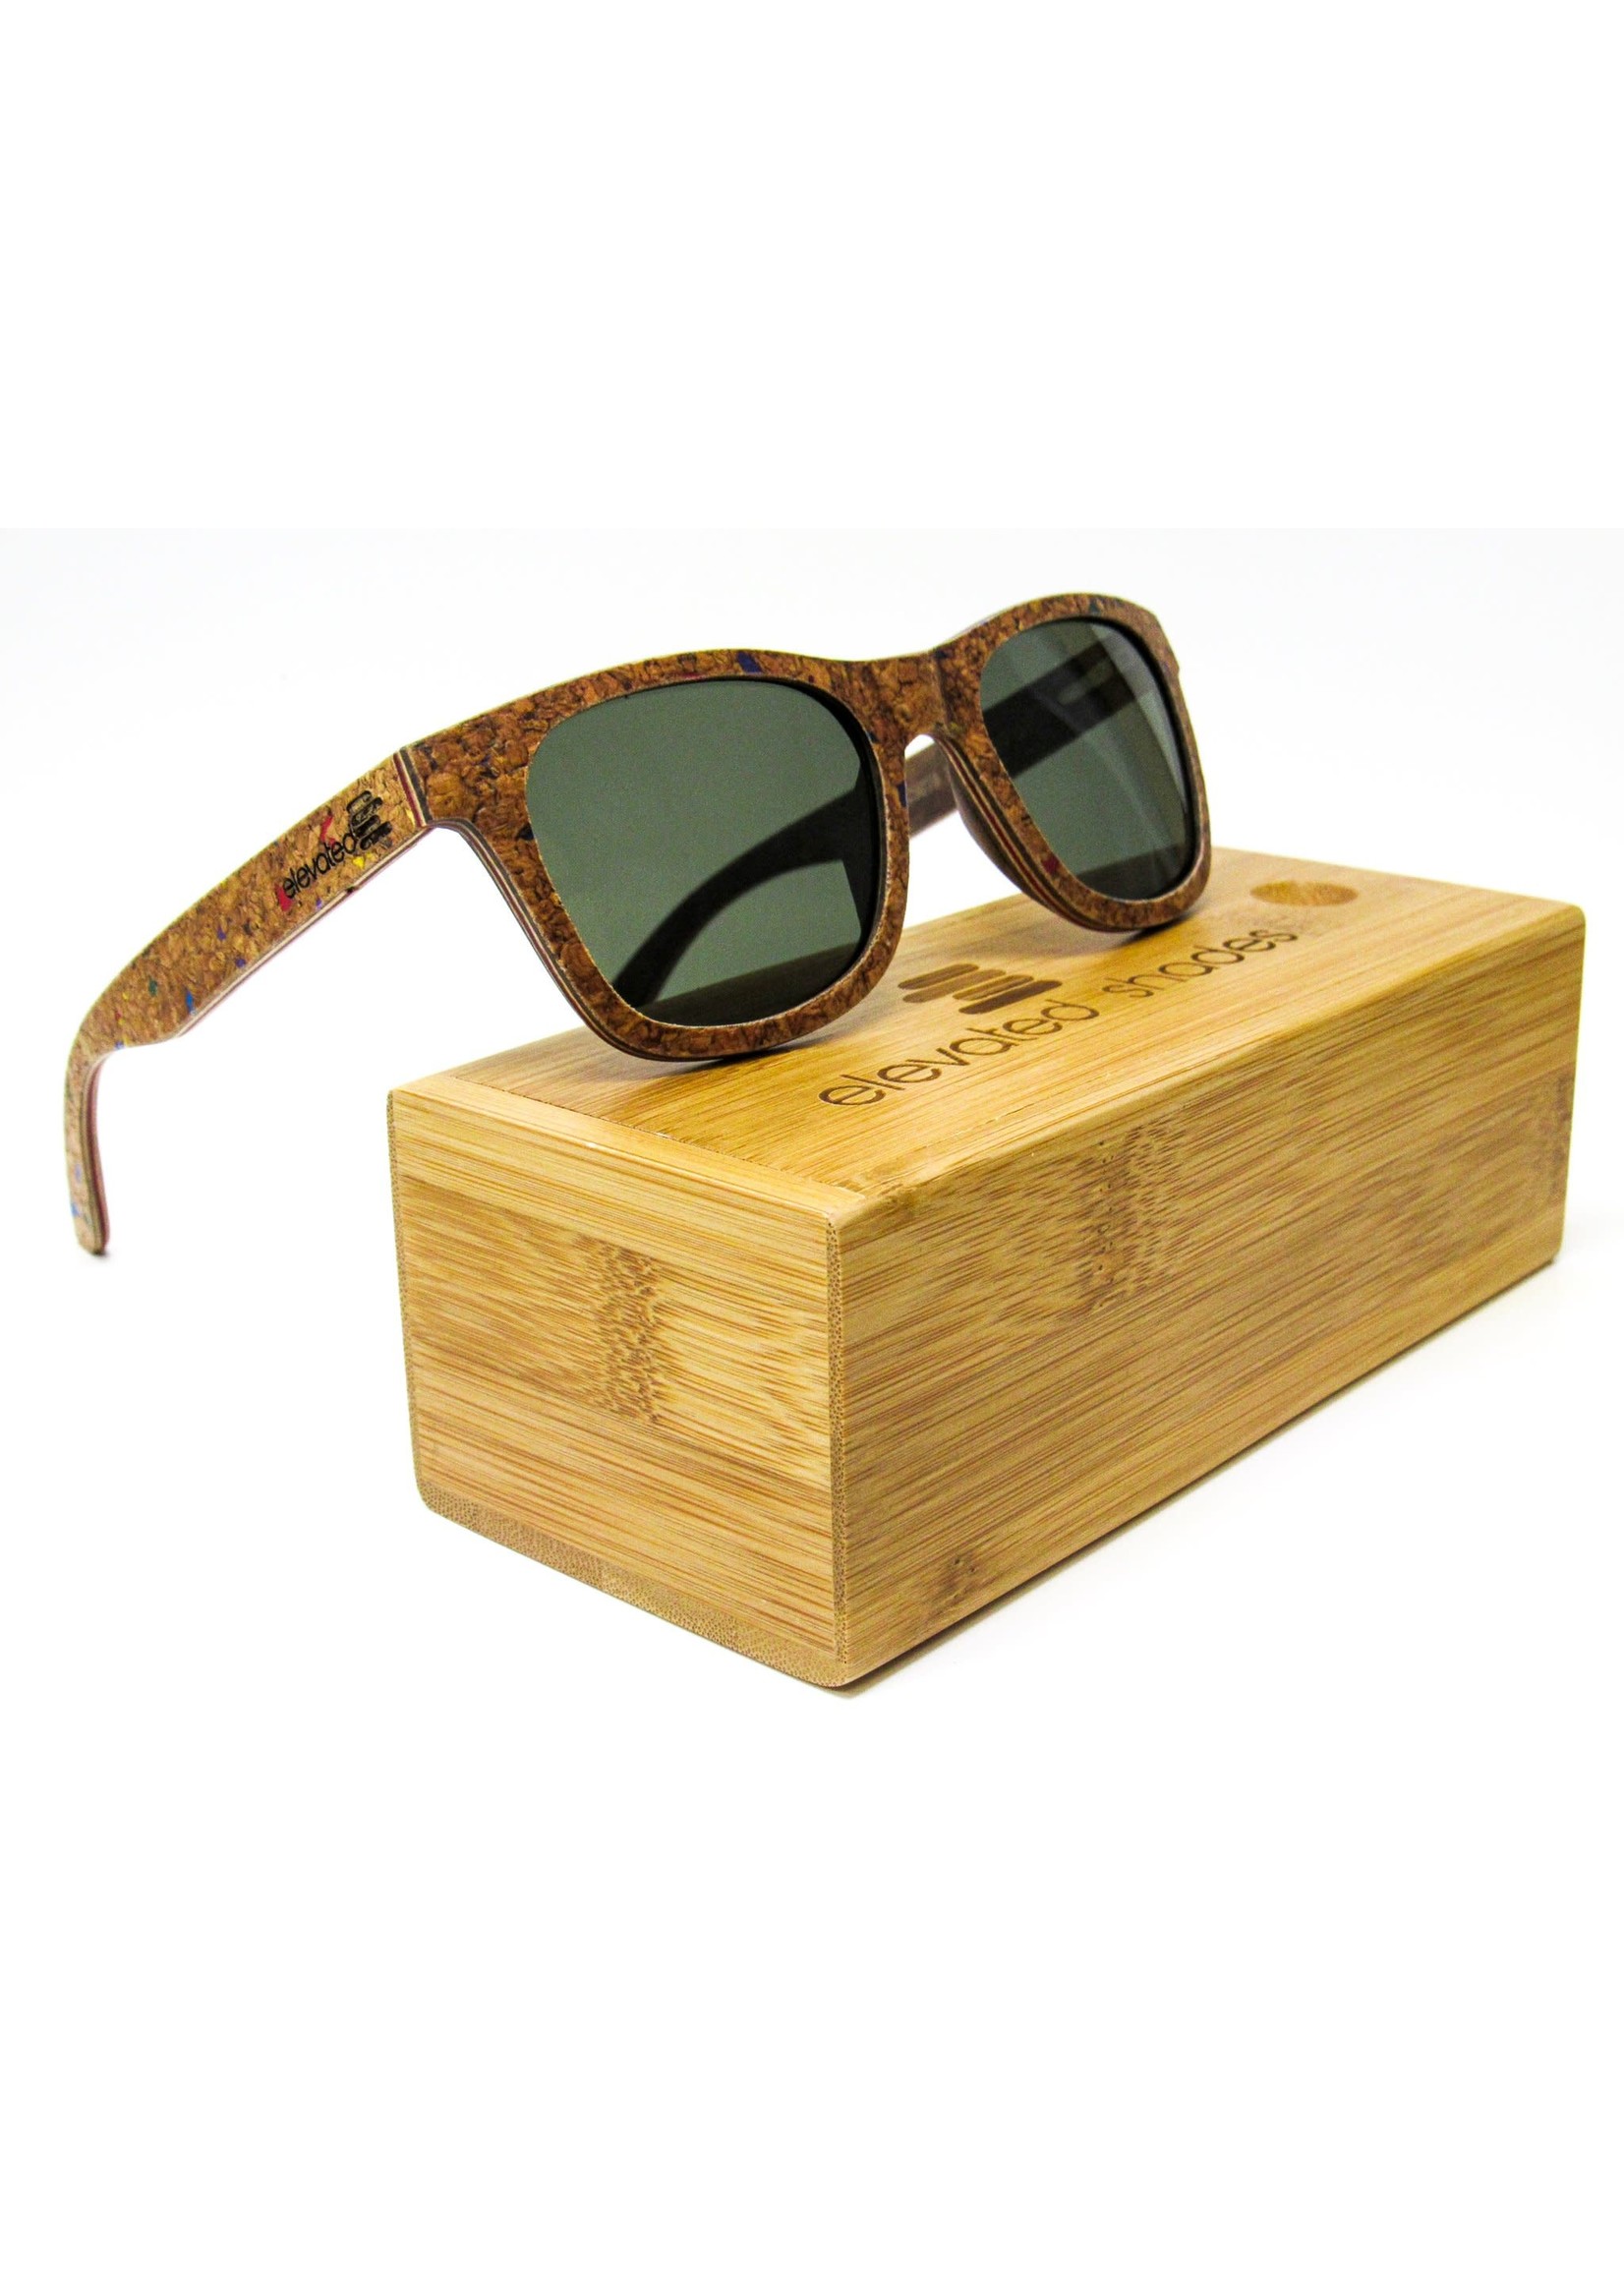 Elevated Shades The "Corked" with Polarized Black Lenses